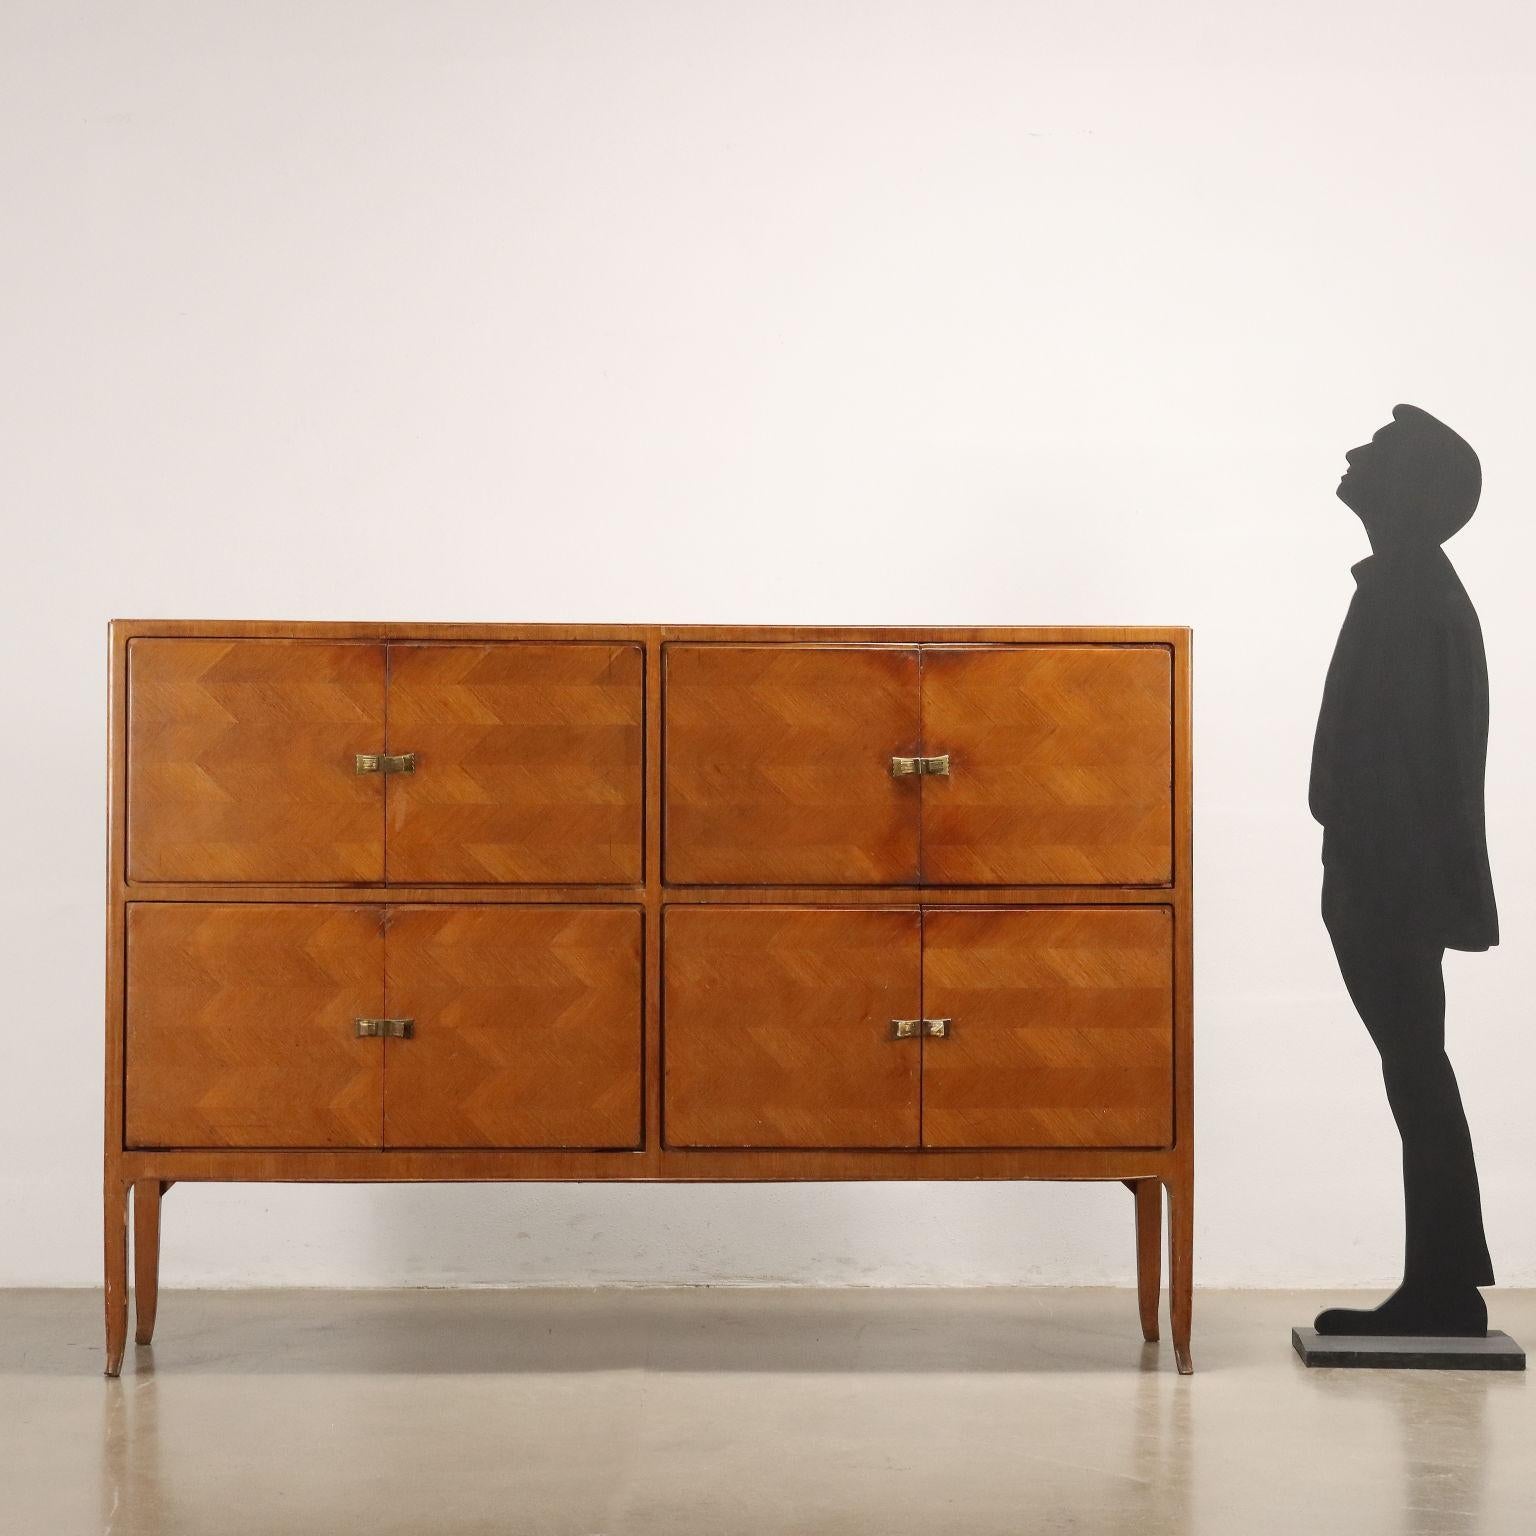 Sideboard with hinged doors, made of mahogany veneered wood and brass handles. Fair condition.